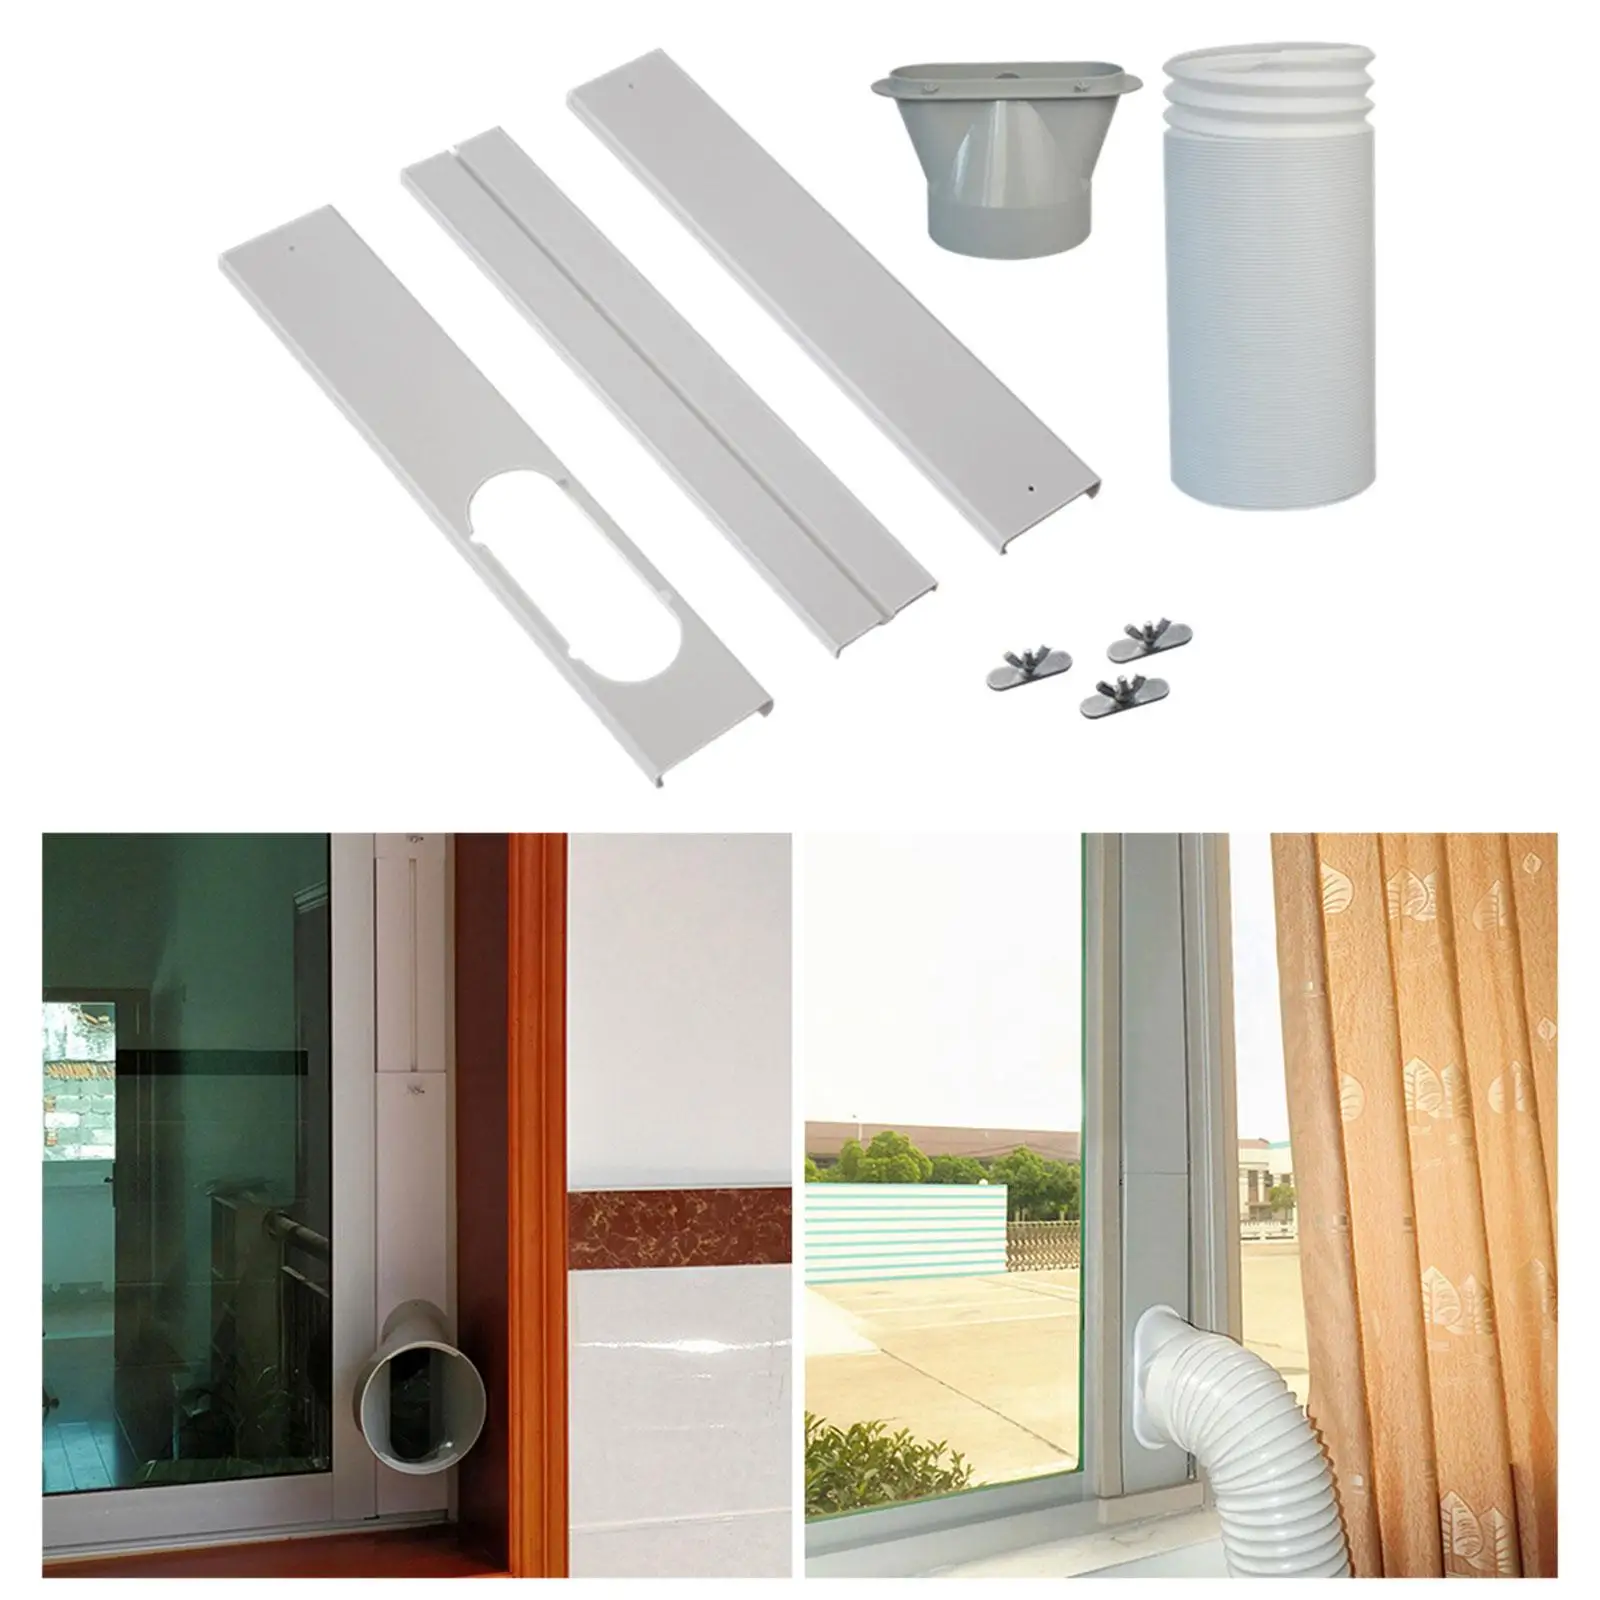 Window Seal for Portable Air Conditioner Adjustable AC Window Seal Vent Kit for Sliding Windows Horizontal or Vertical Windows